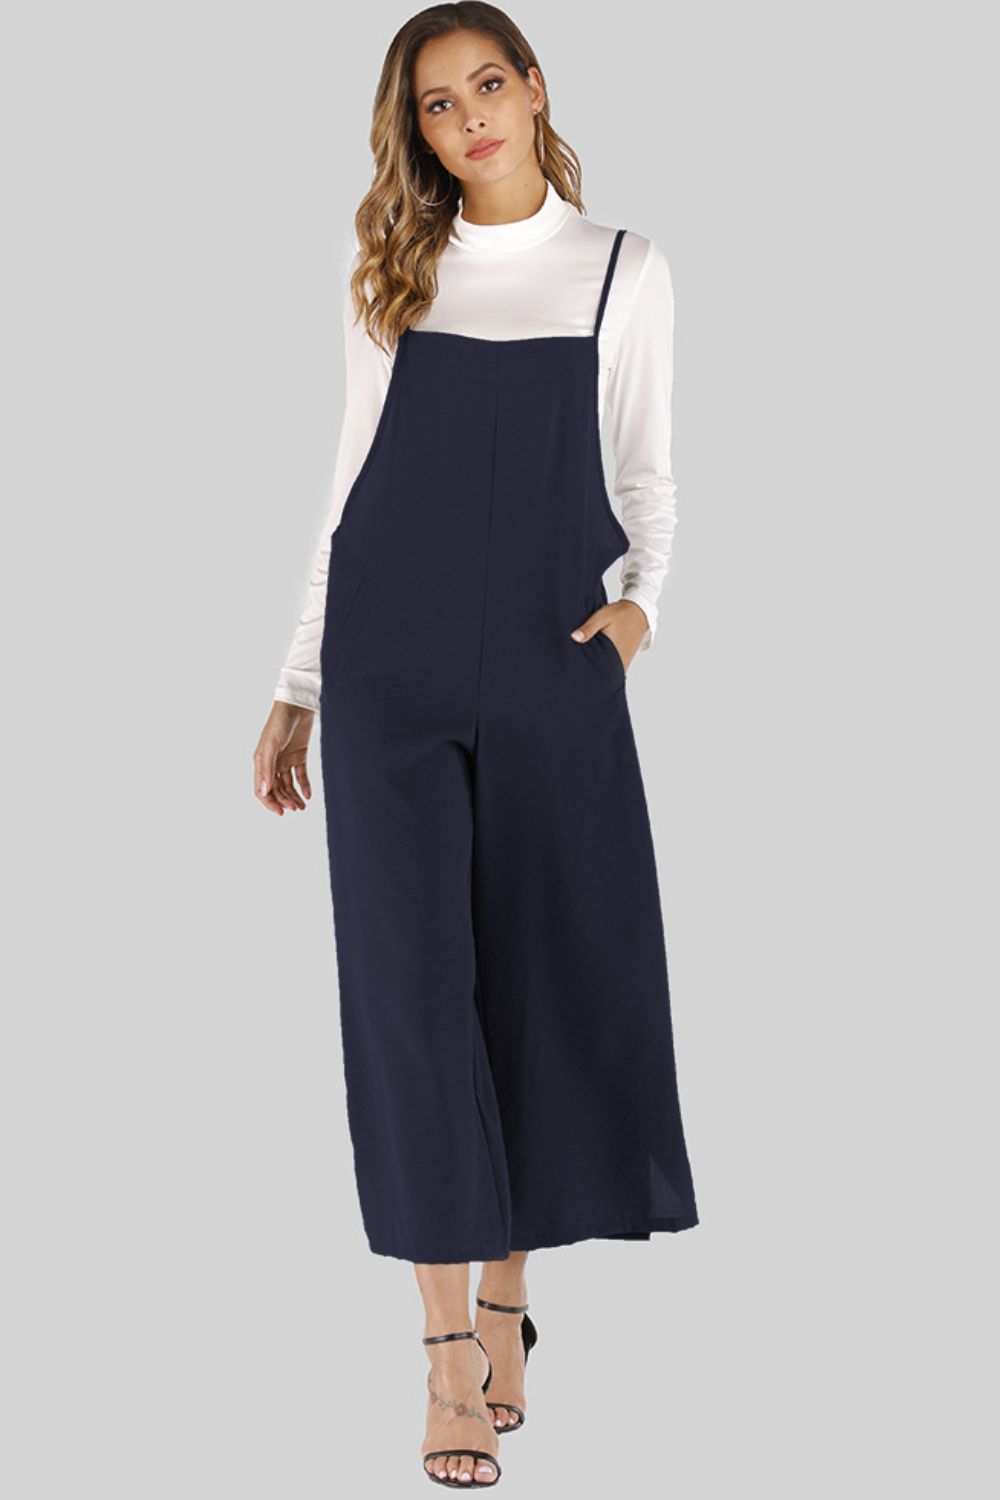 Ohai Cropped Wide Leg Overalls with Pockets S-5XL